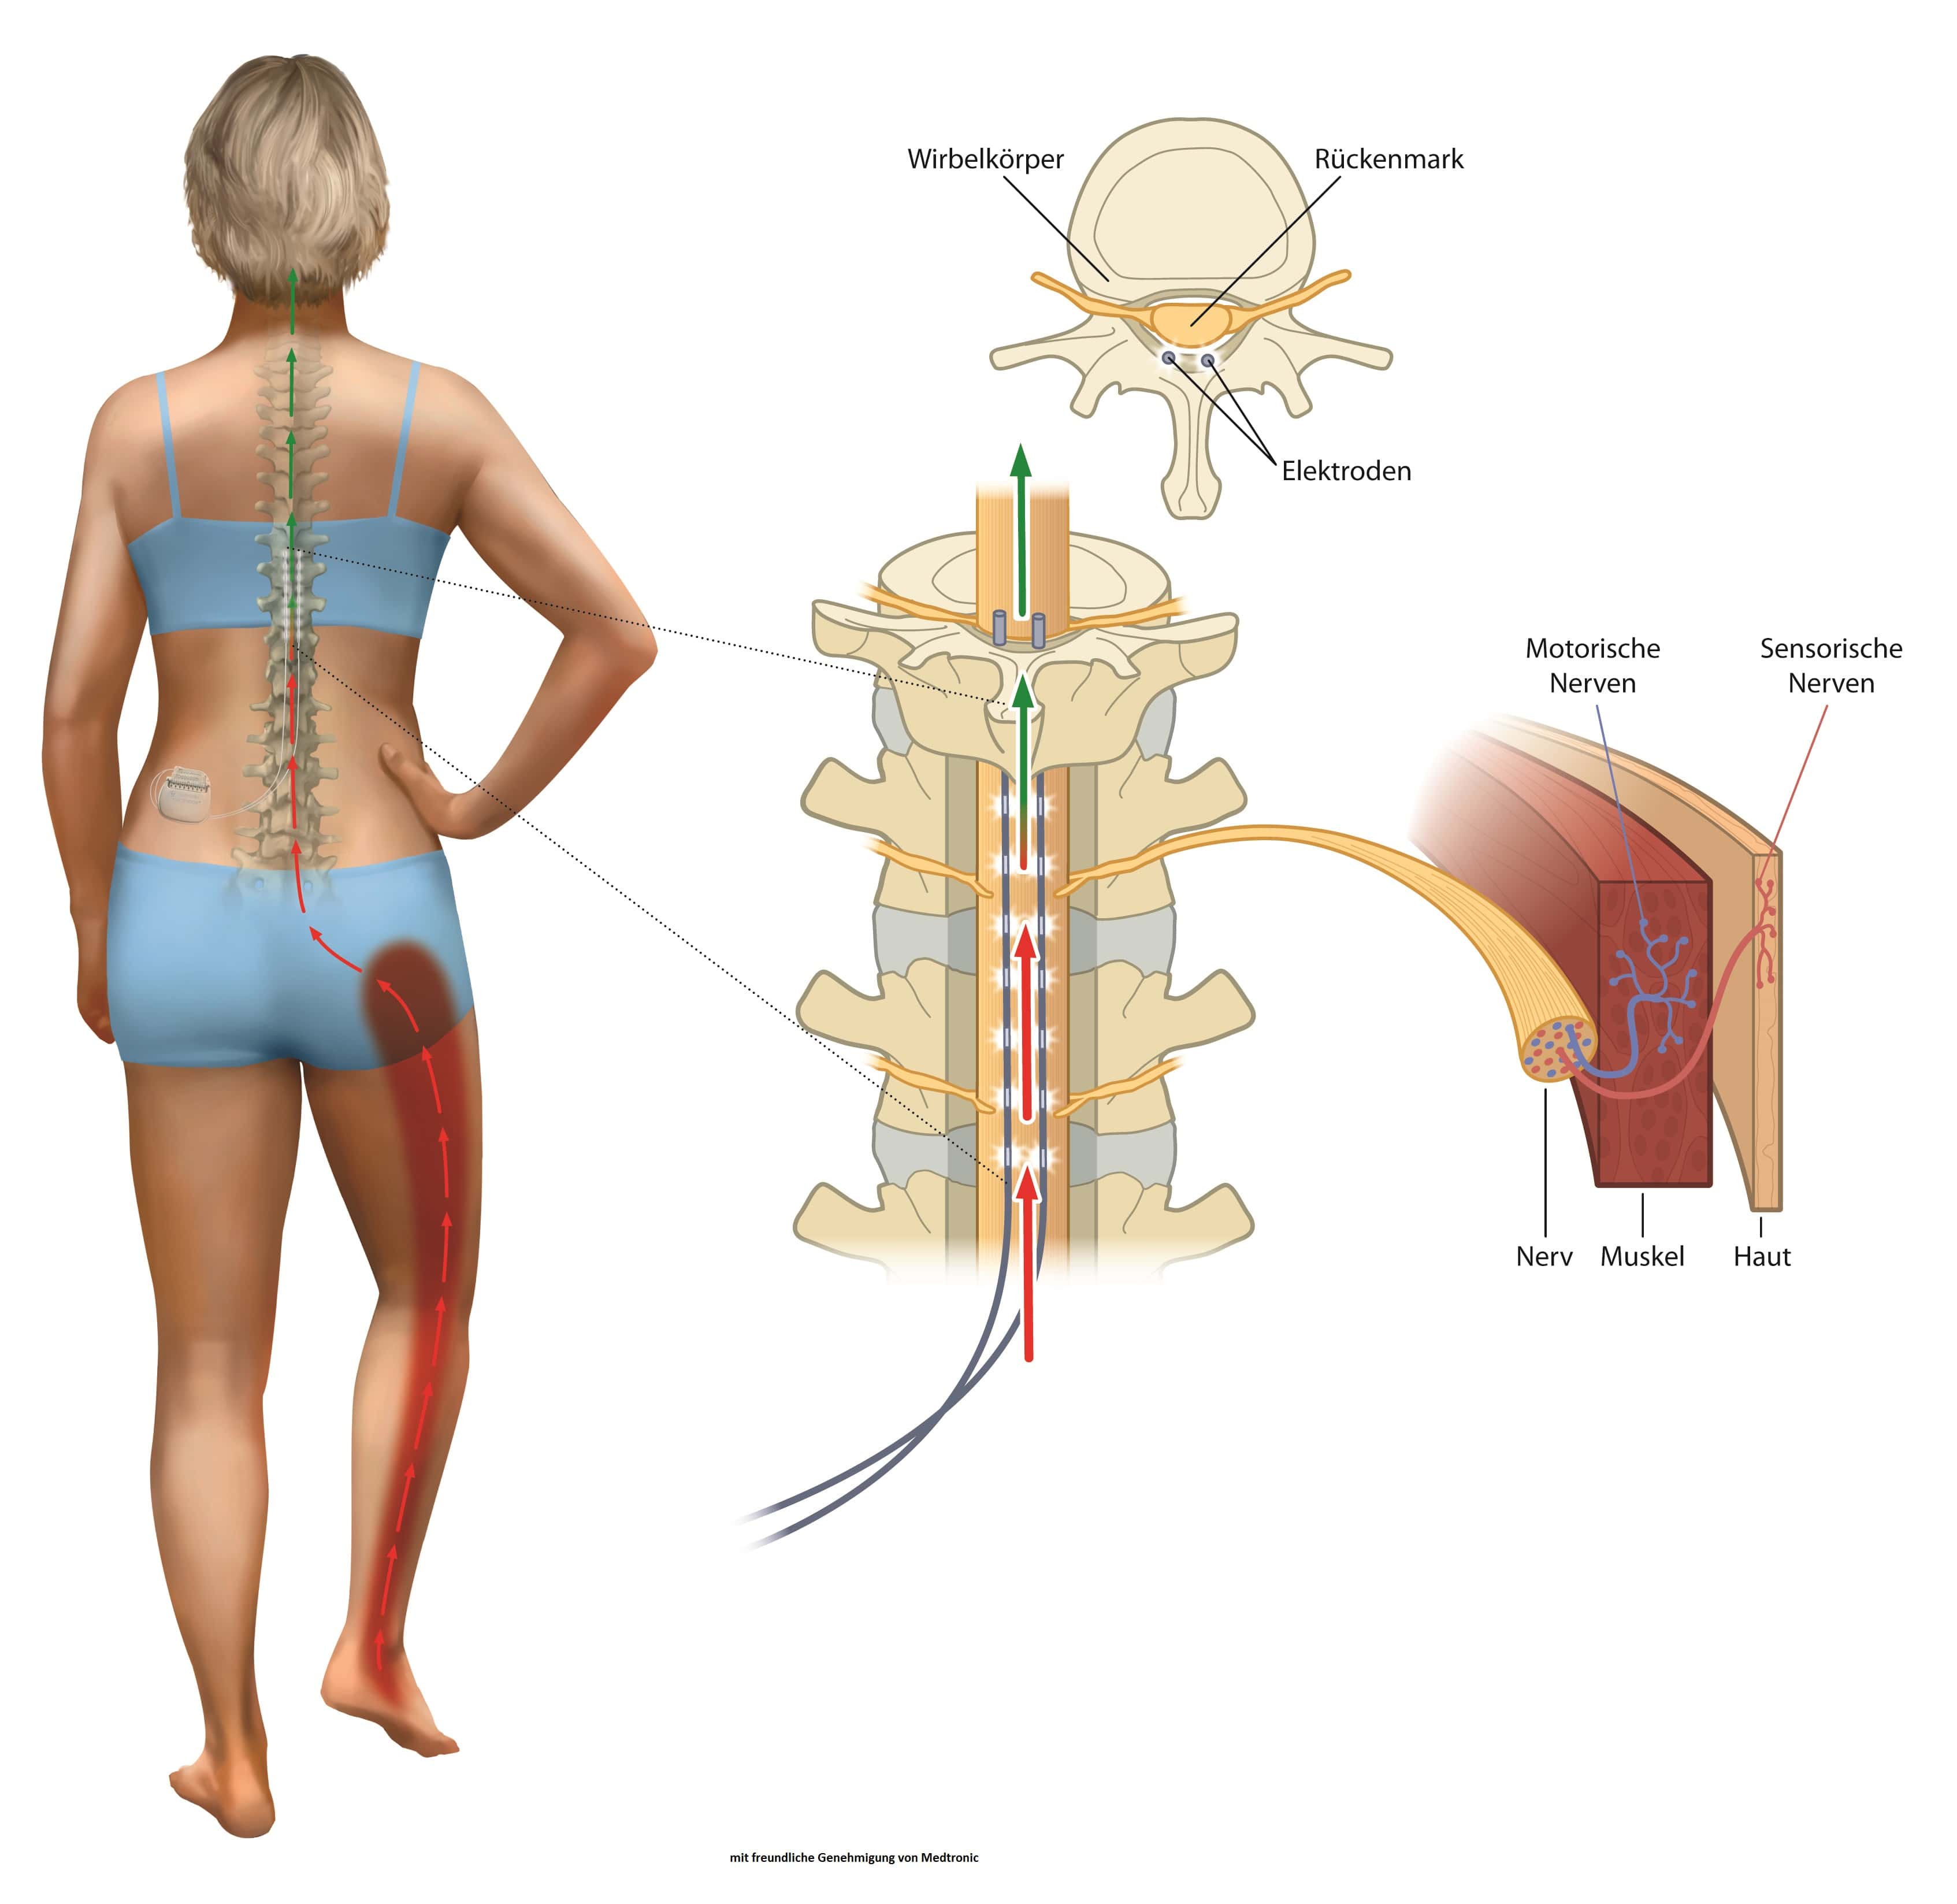 Spinal Cord Stimulation - Pain pacemaker